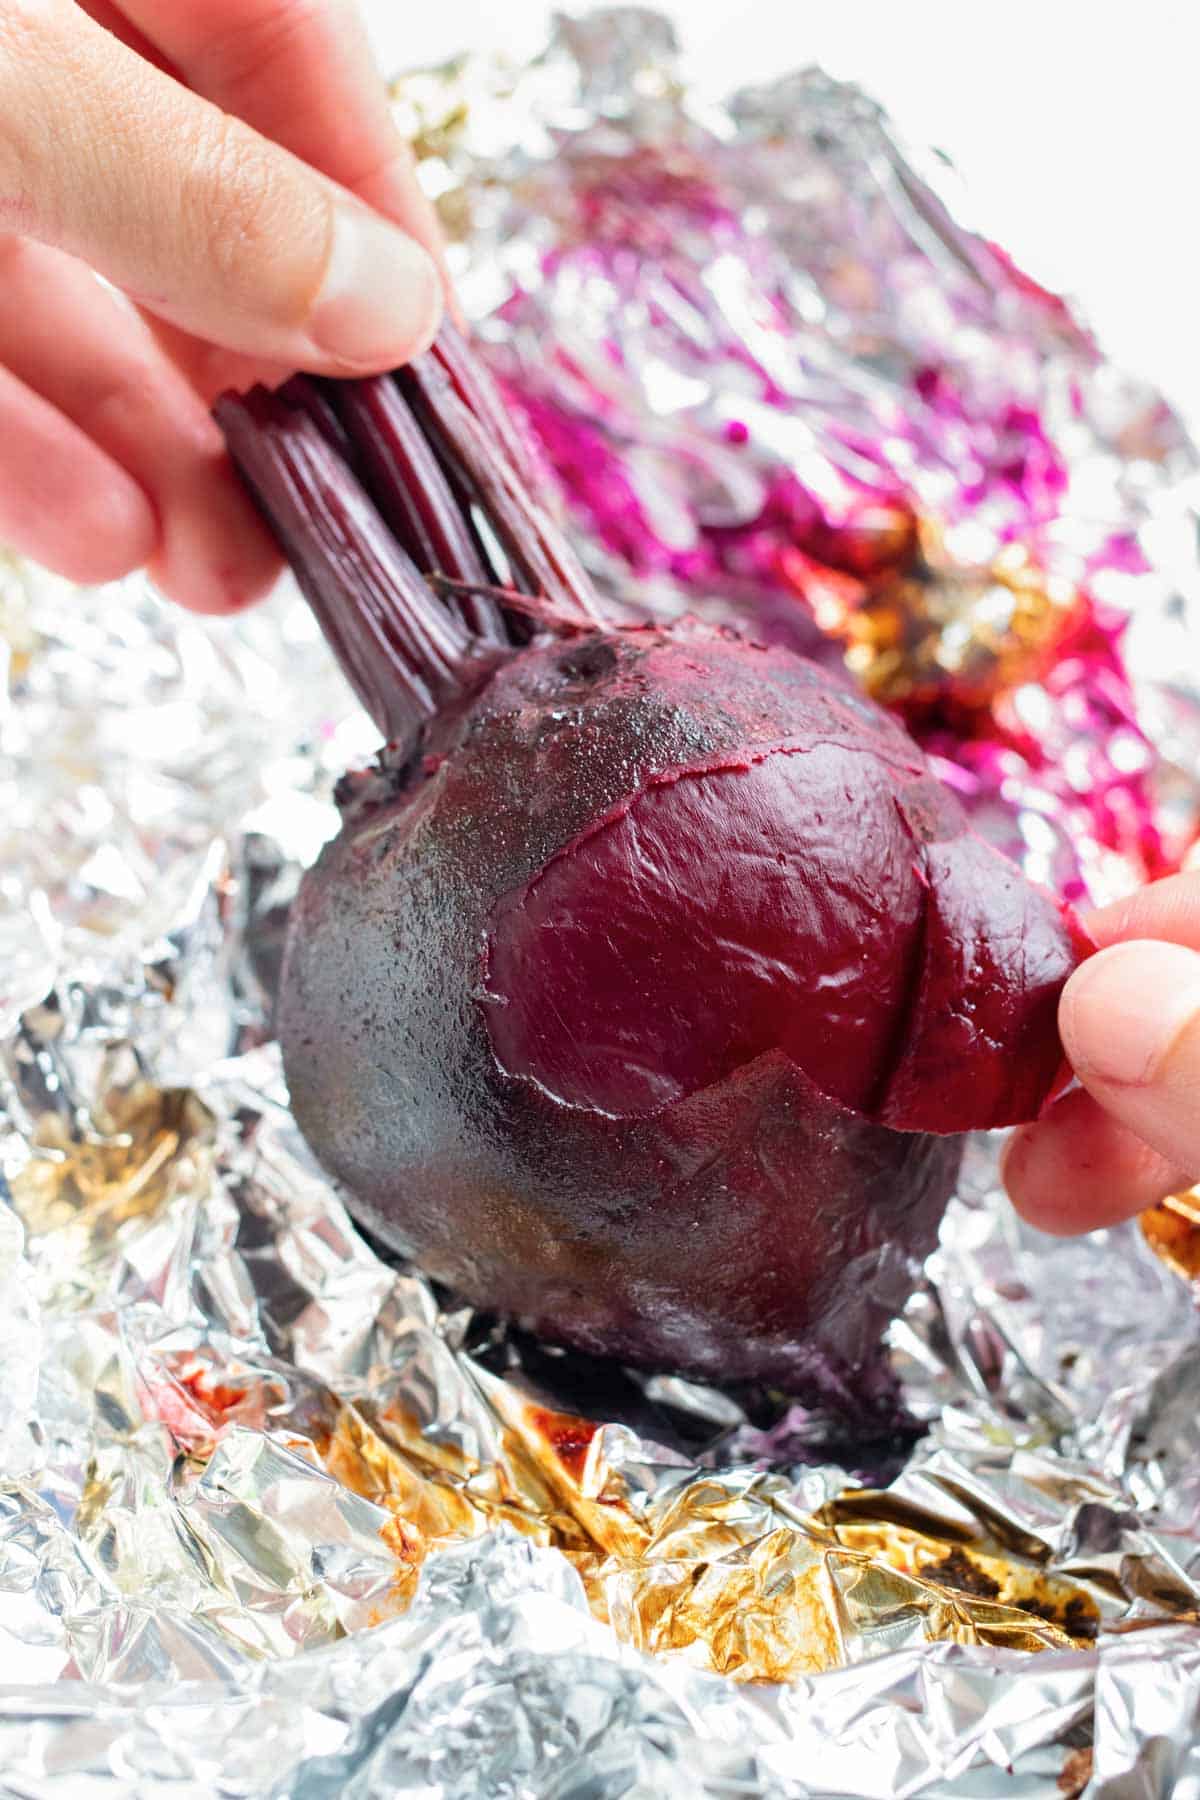 Using your fingers, easily peel back the skin on the roasted beets.